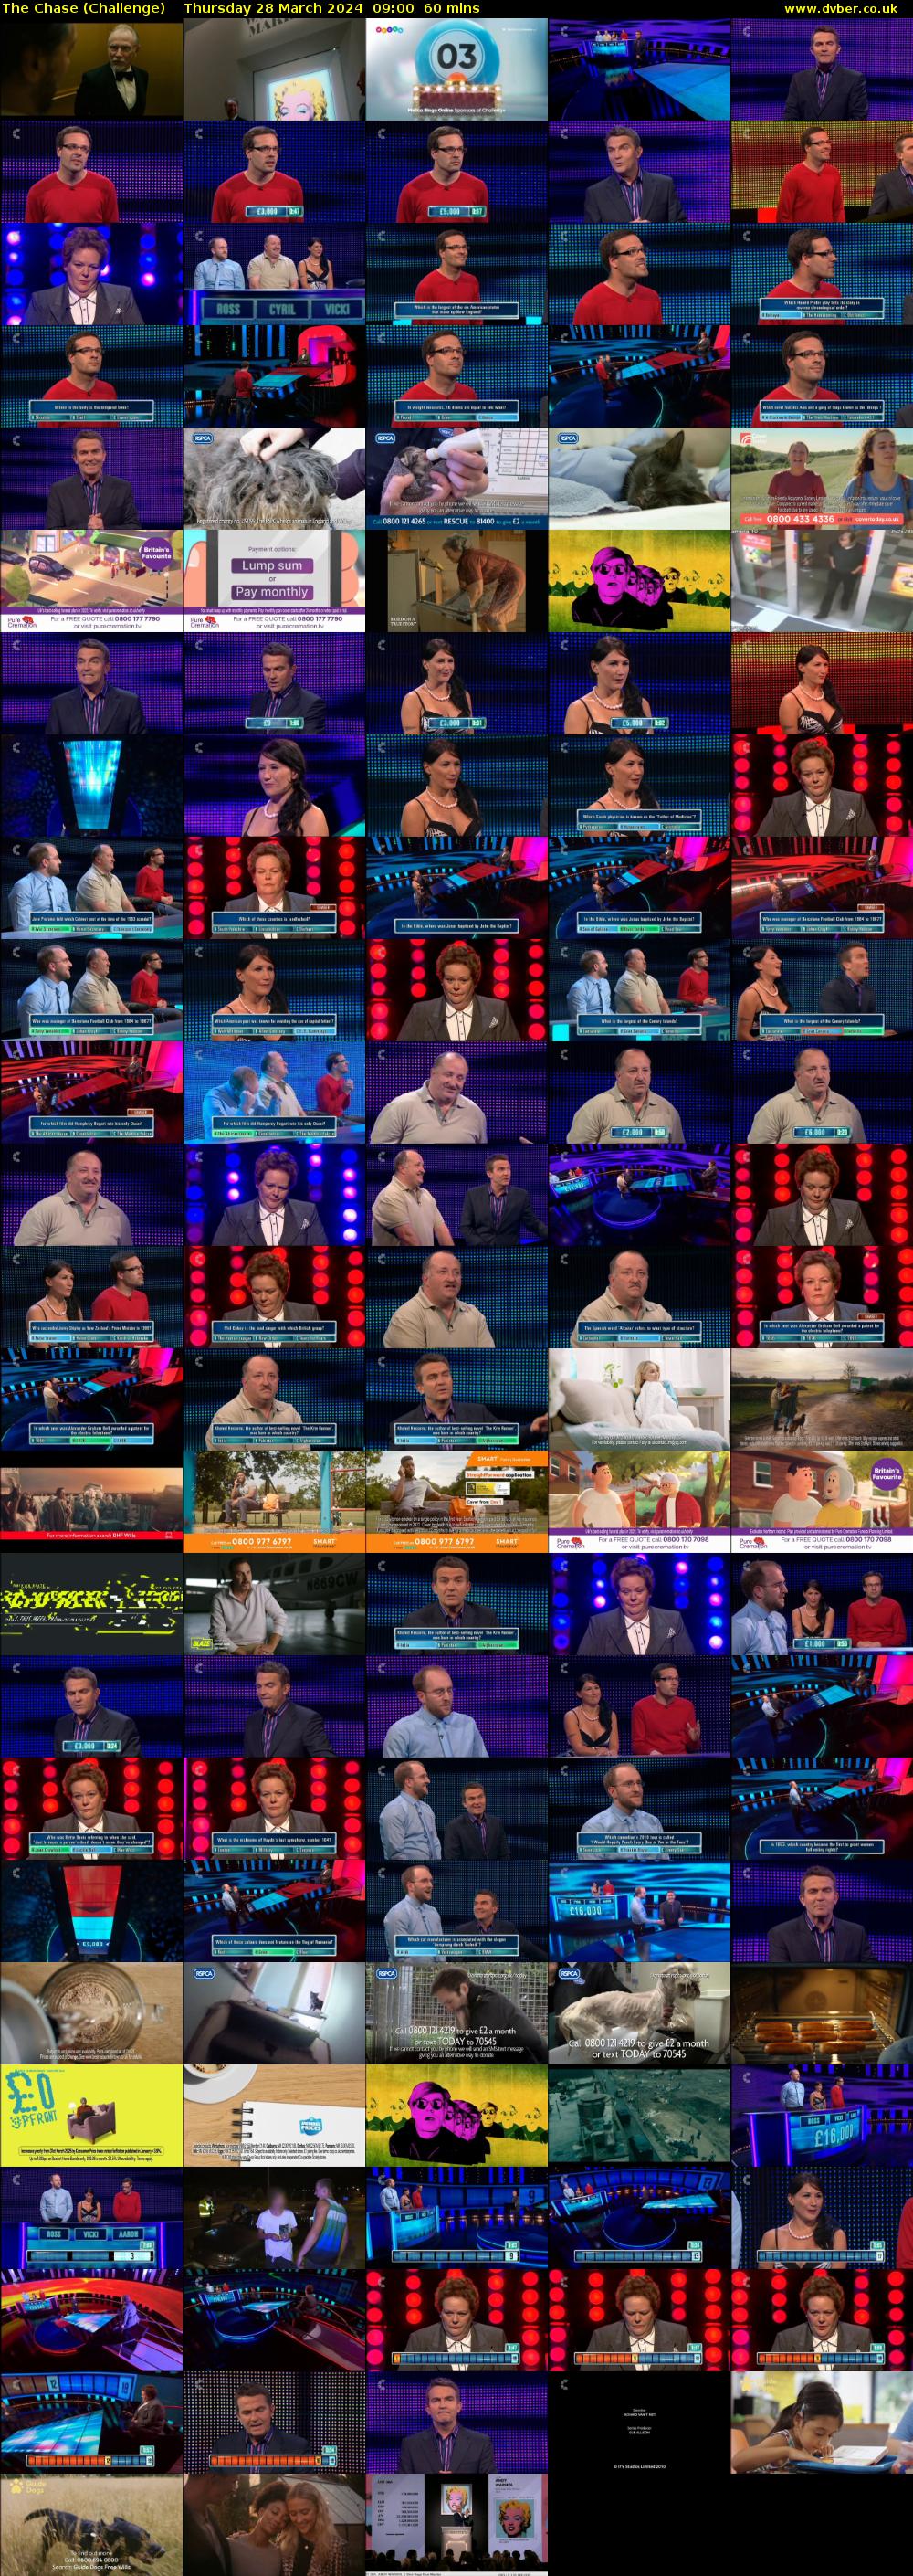 The Chase (Challenge) Thursday 28 March 2024 09:00 - 10:00